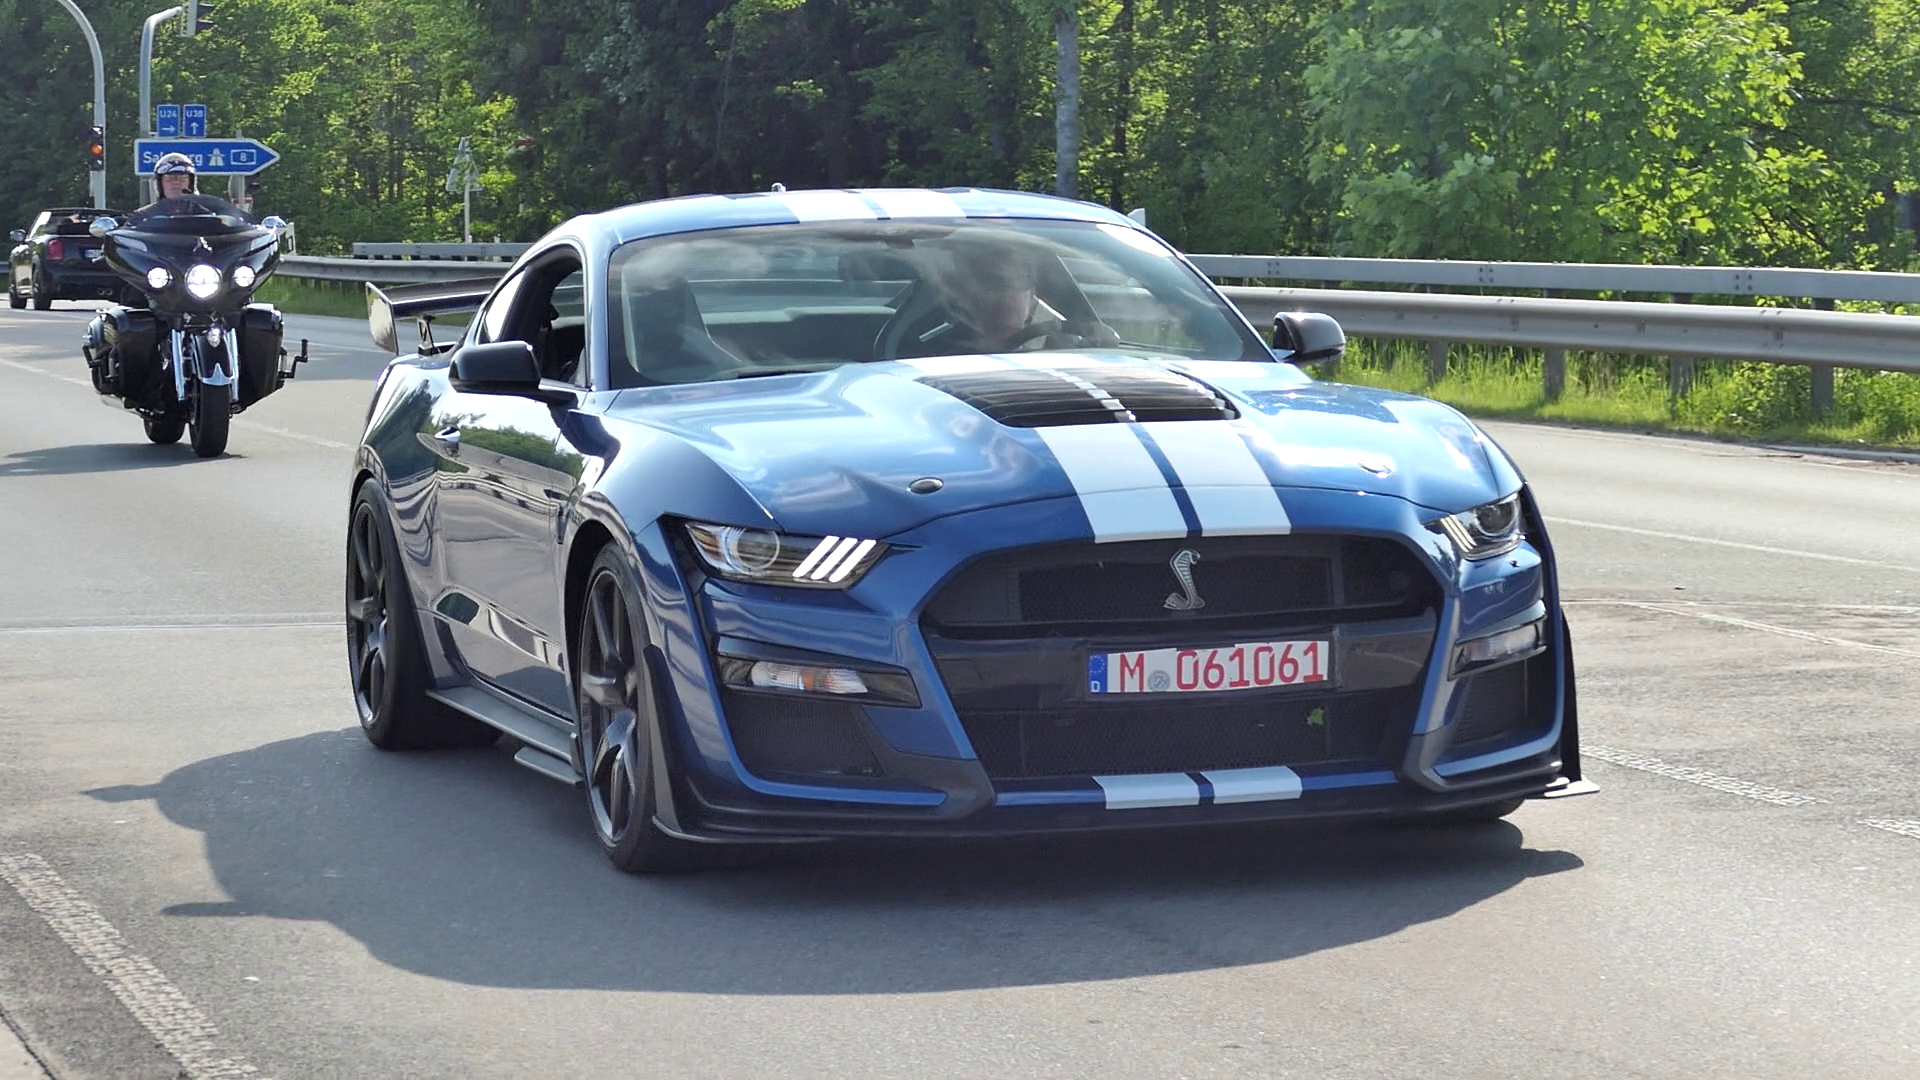 Ford Mustang Shelby GT 350 - M-061061